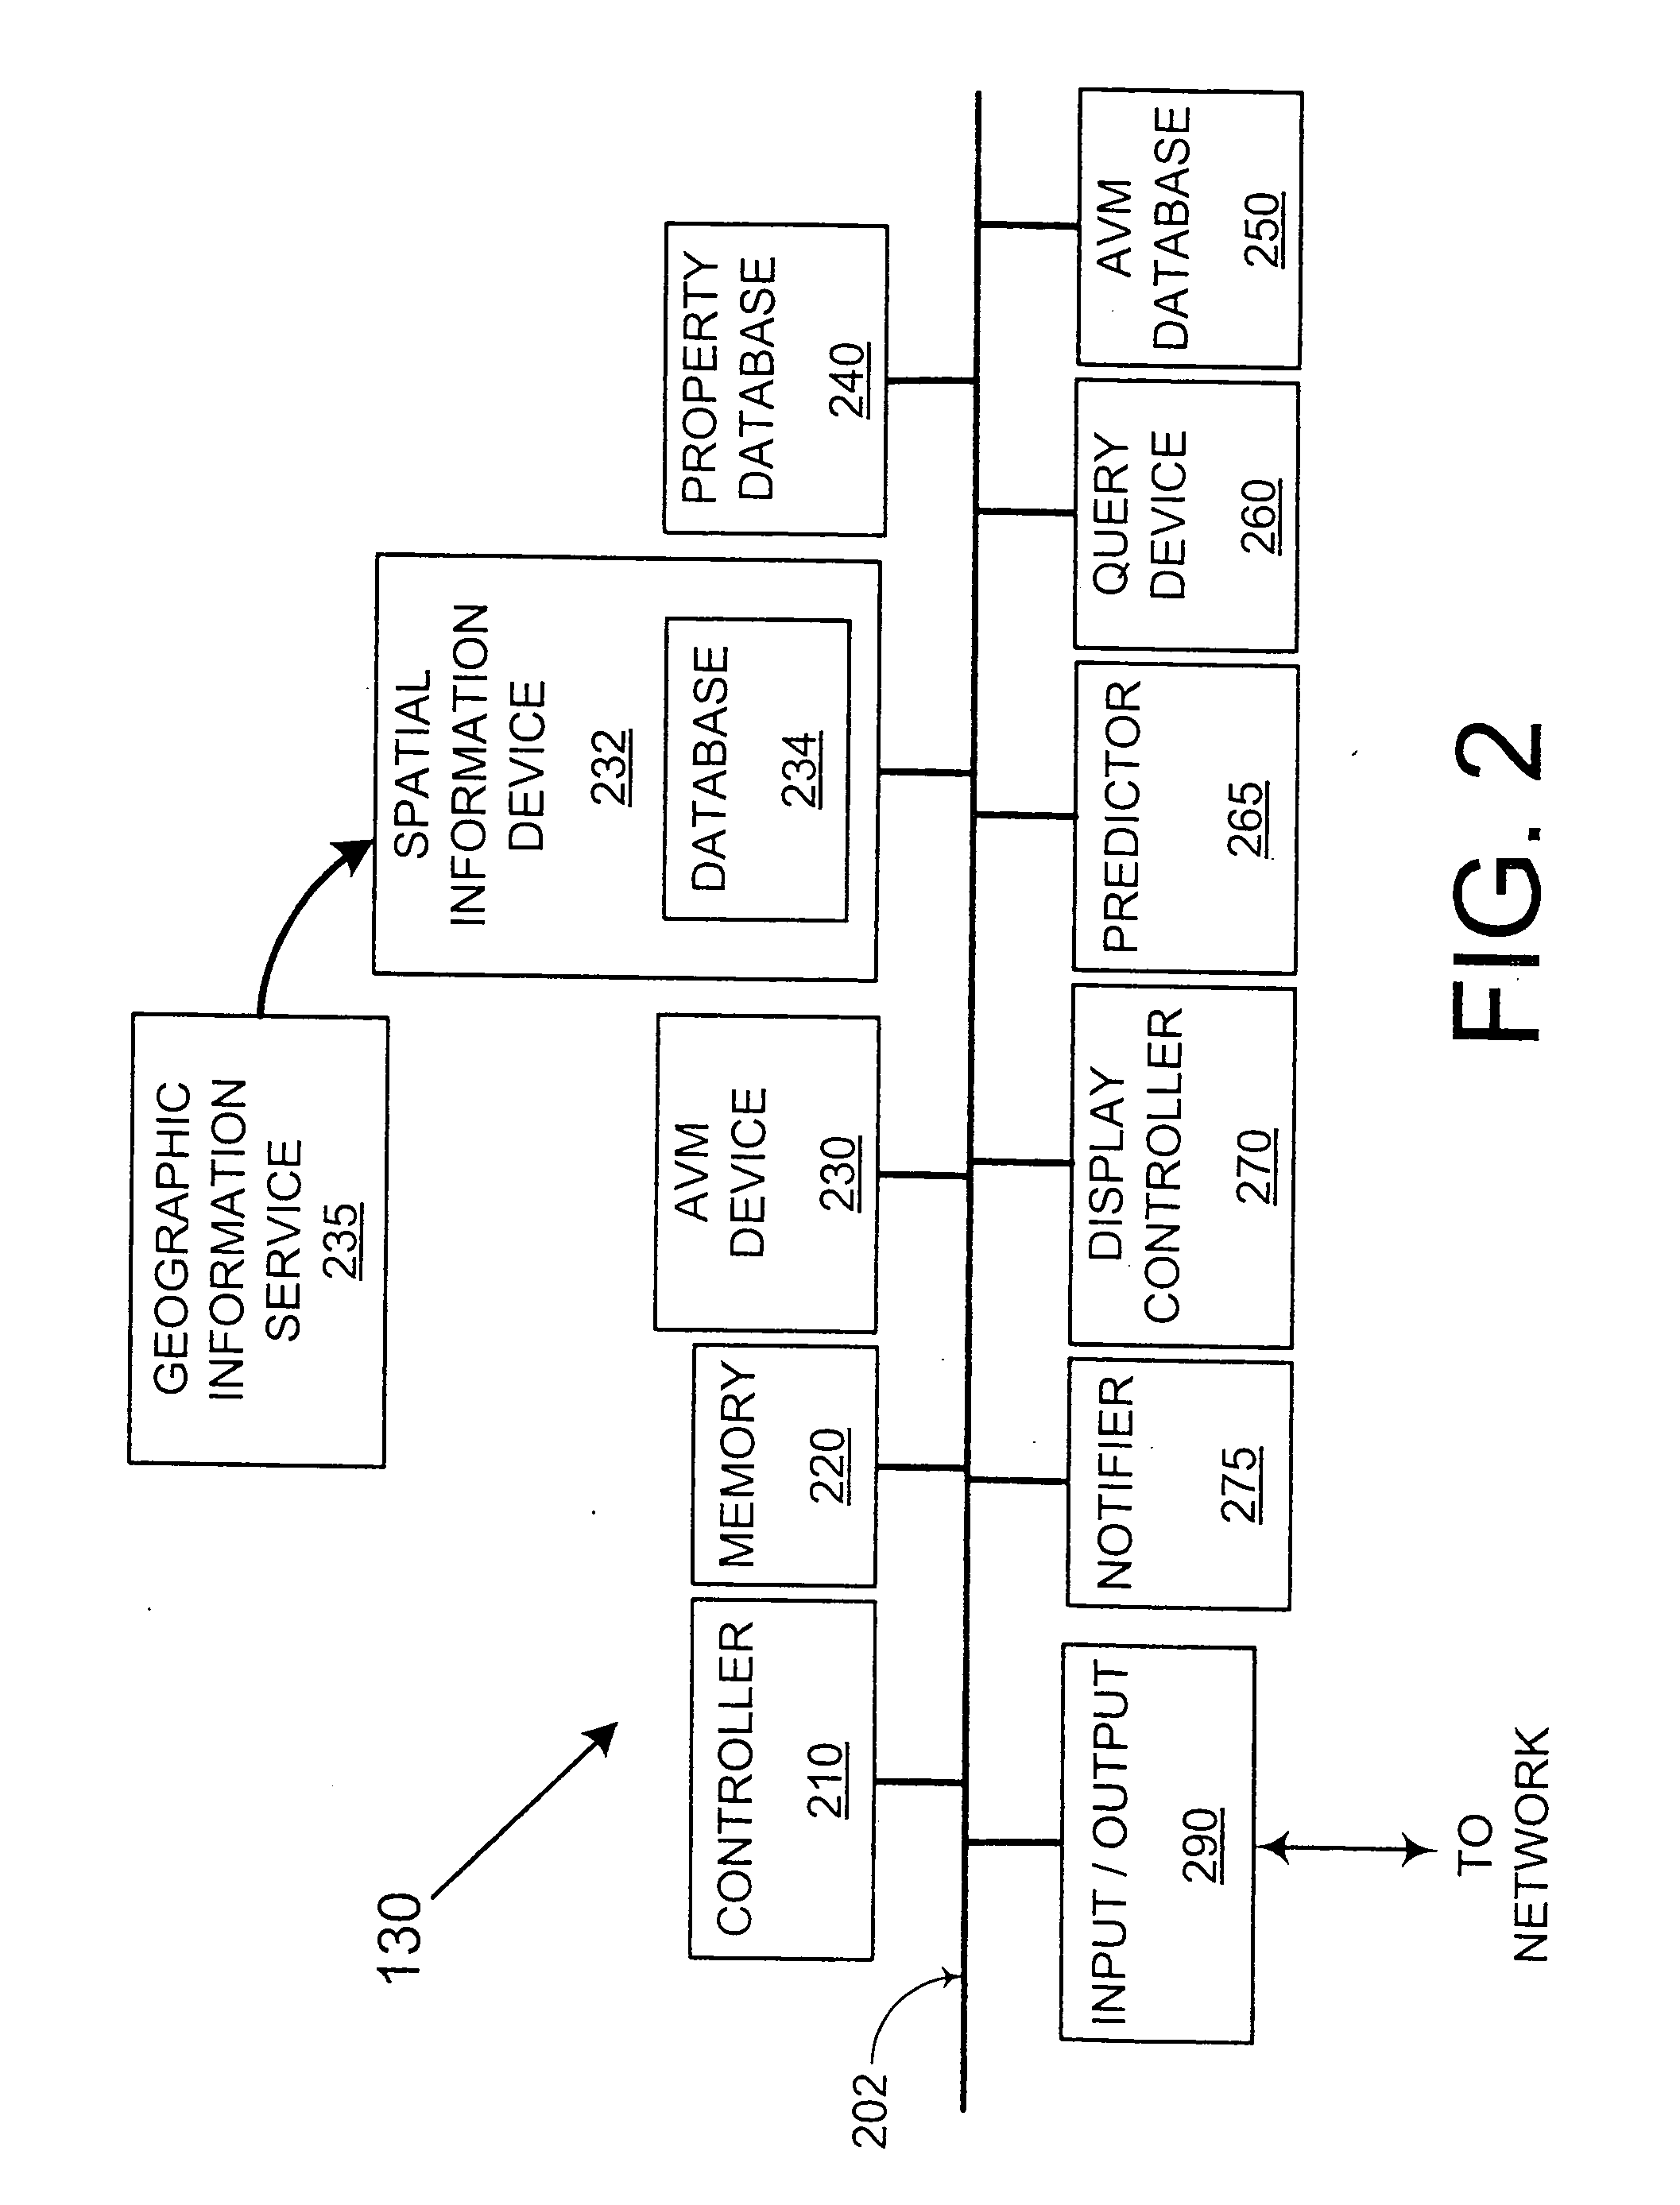 Computerized agent and systems for automatic searching of properties having favorable attributes